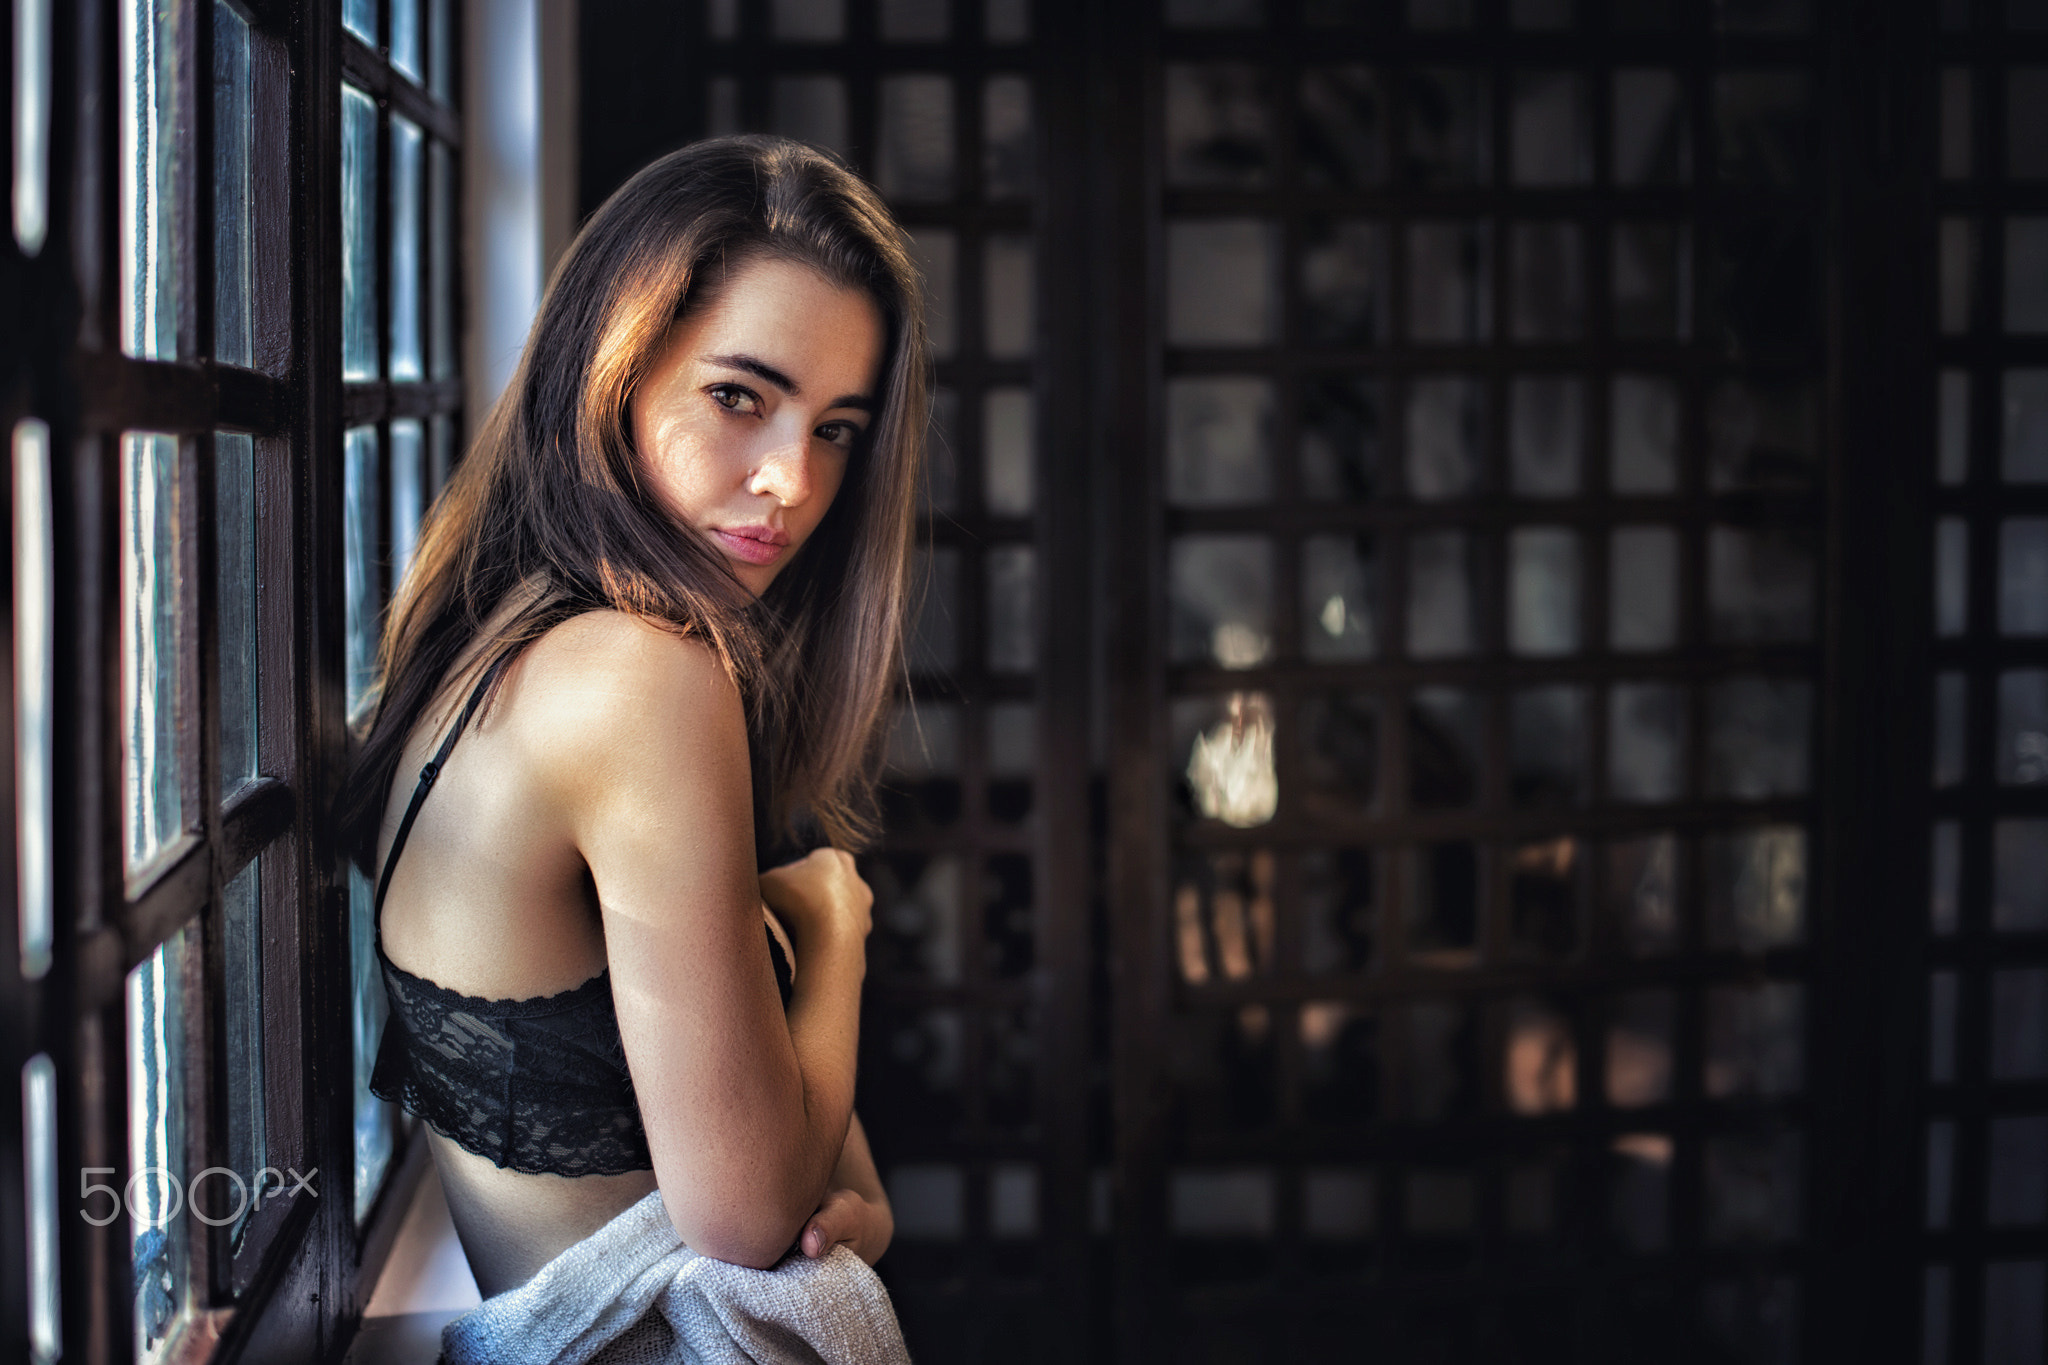 People 2048x1365 Lidia Savoderova women portrait black lingerie Pablo Cañas Russian model 500px watermarked indoors window by the window looking at viewer text